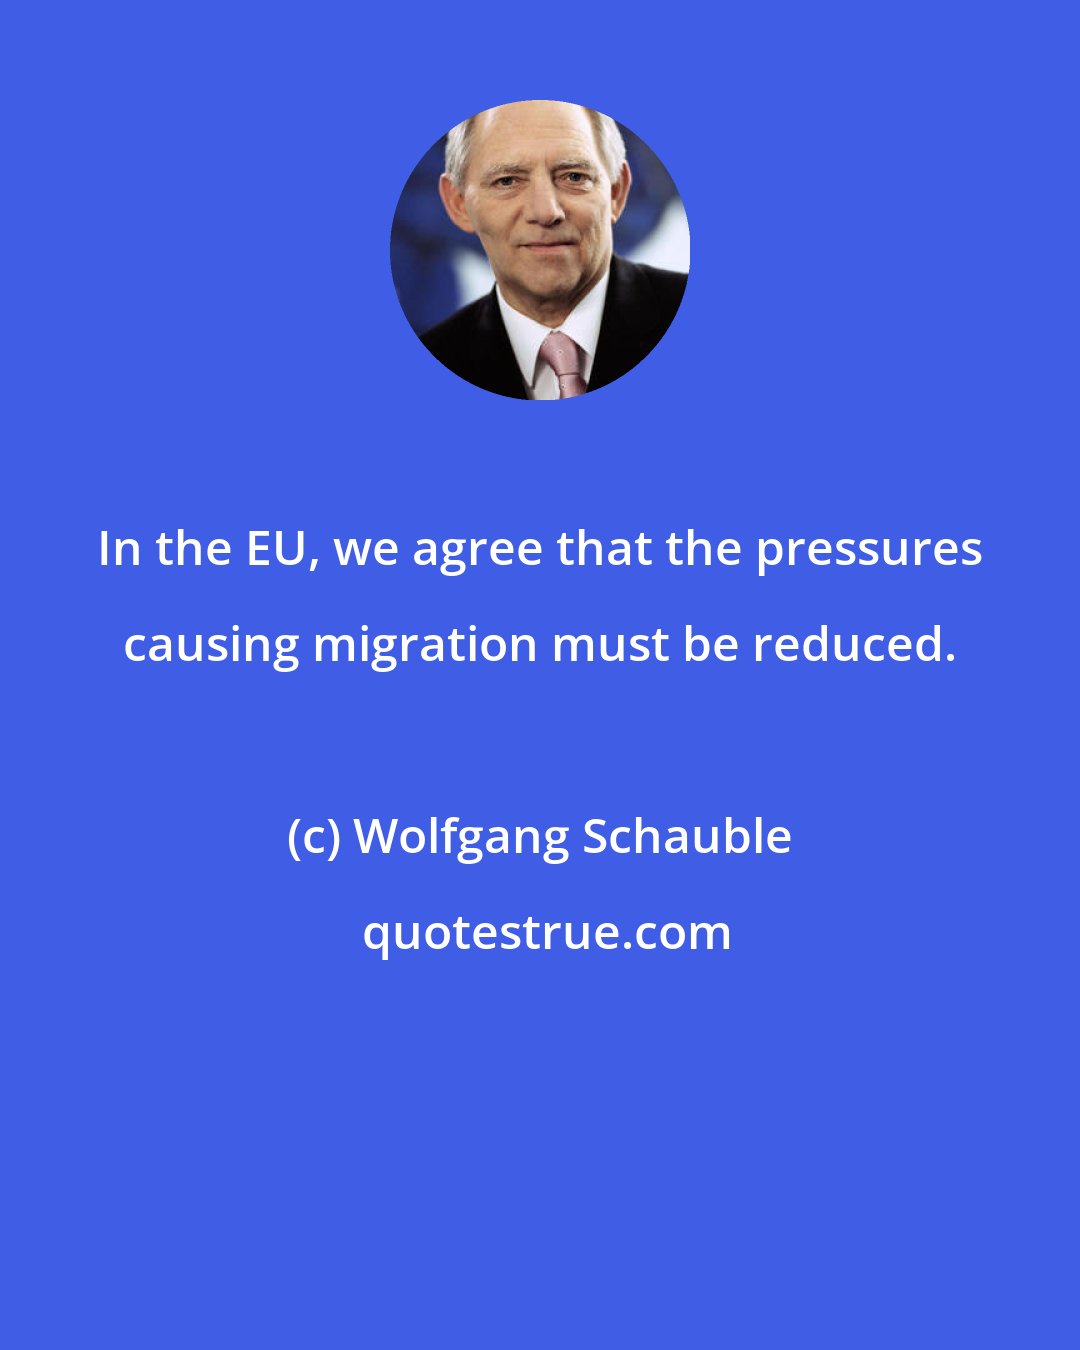 Wolfgang Schauble: In the EU, we agree that the pressures causing migration must be reduced.